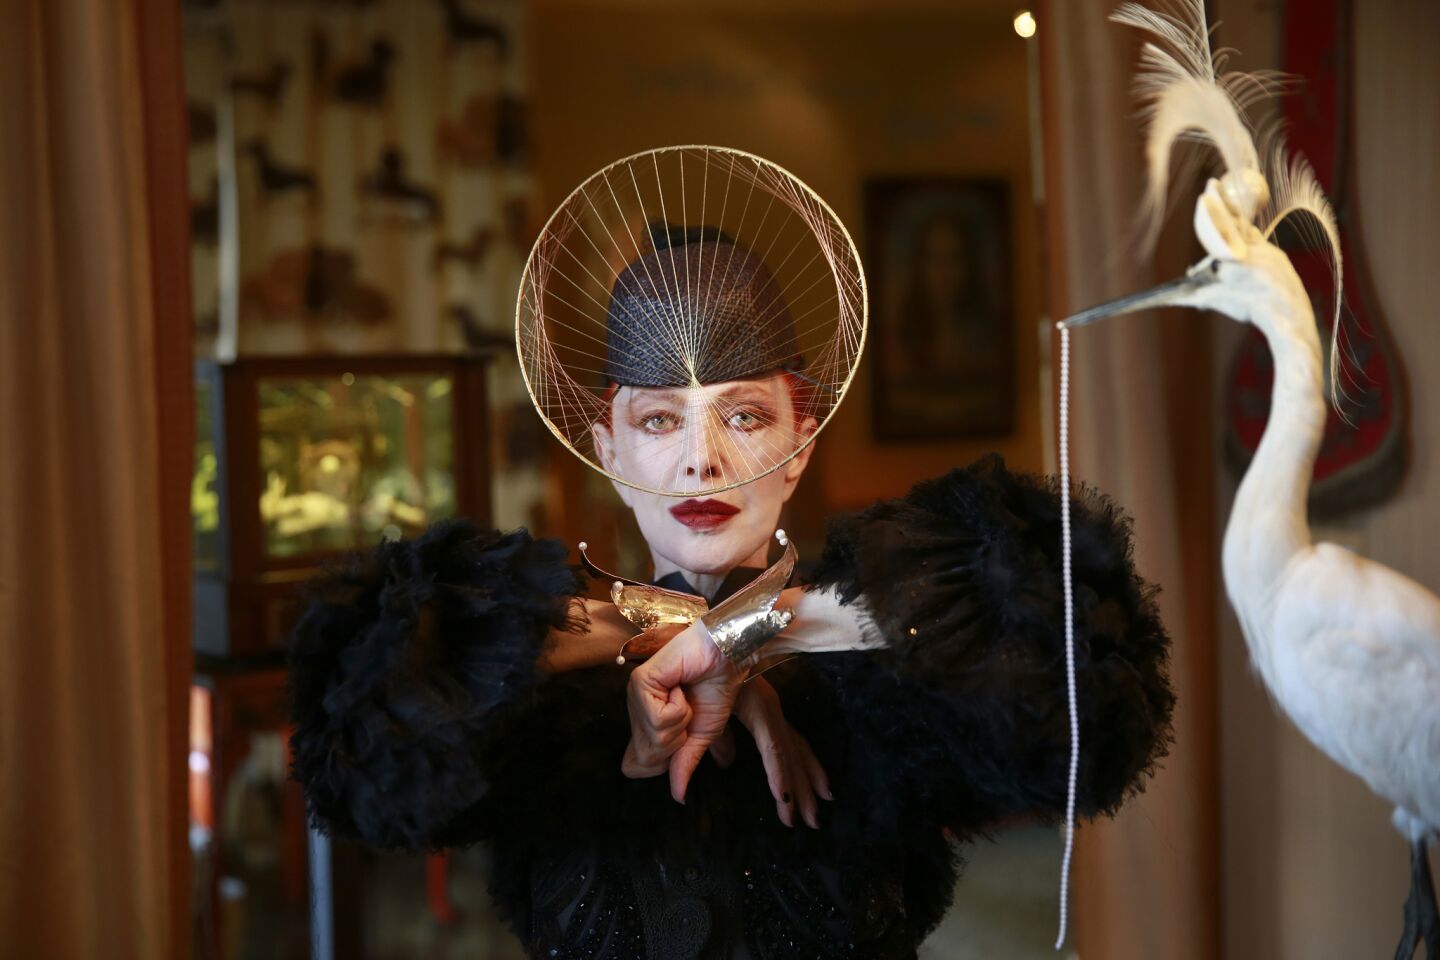 Valerie von Sobel, who is on the cover of the book "Advanced Style: Older and Wiser," is photographed with her art work at her home in West Hollywood.